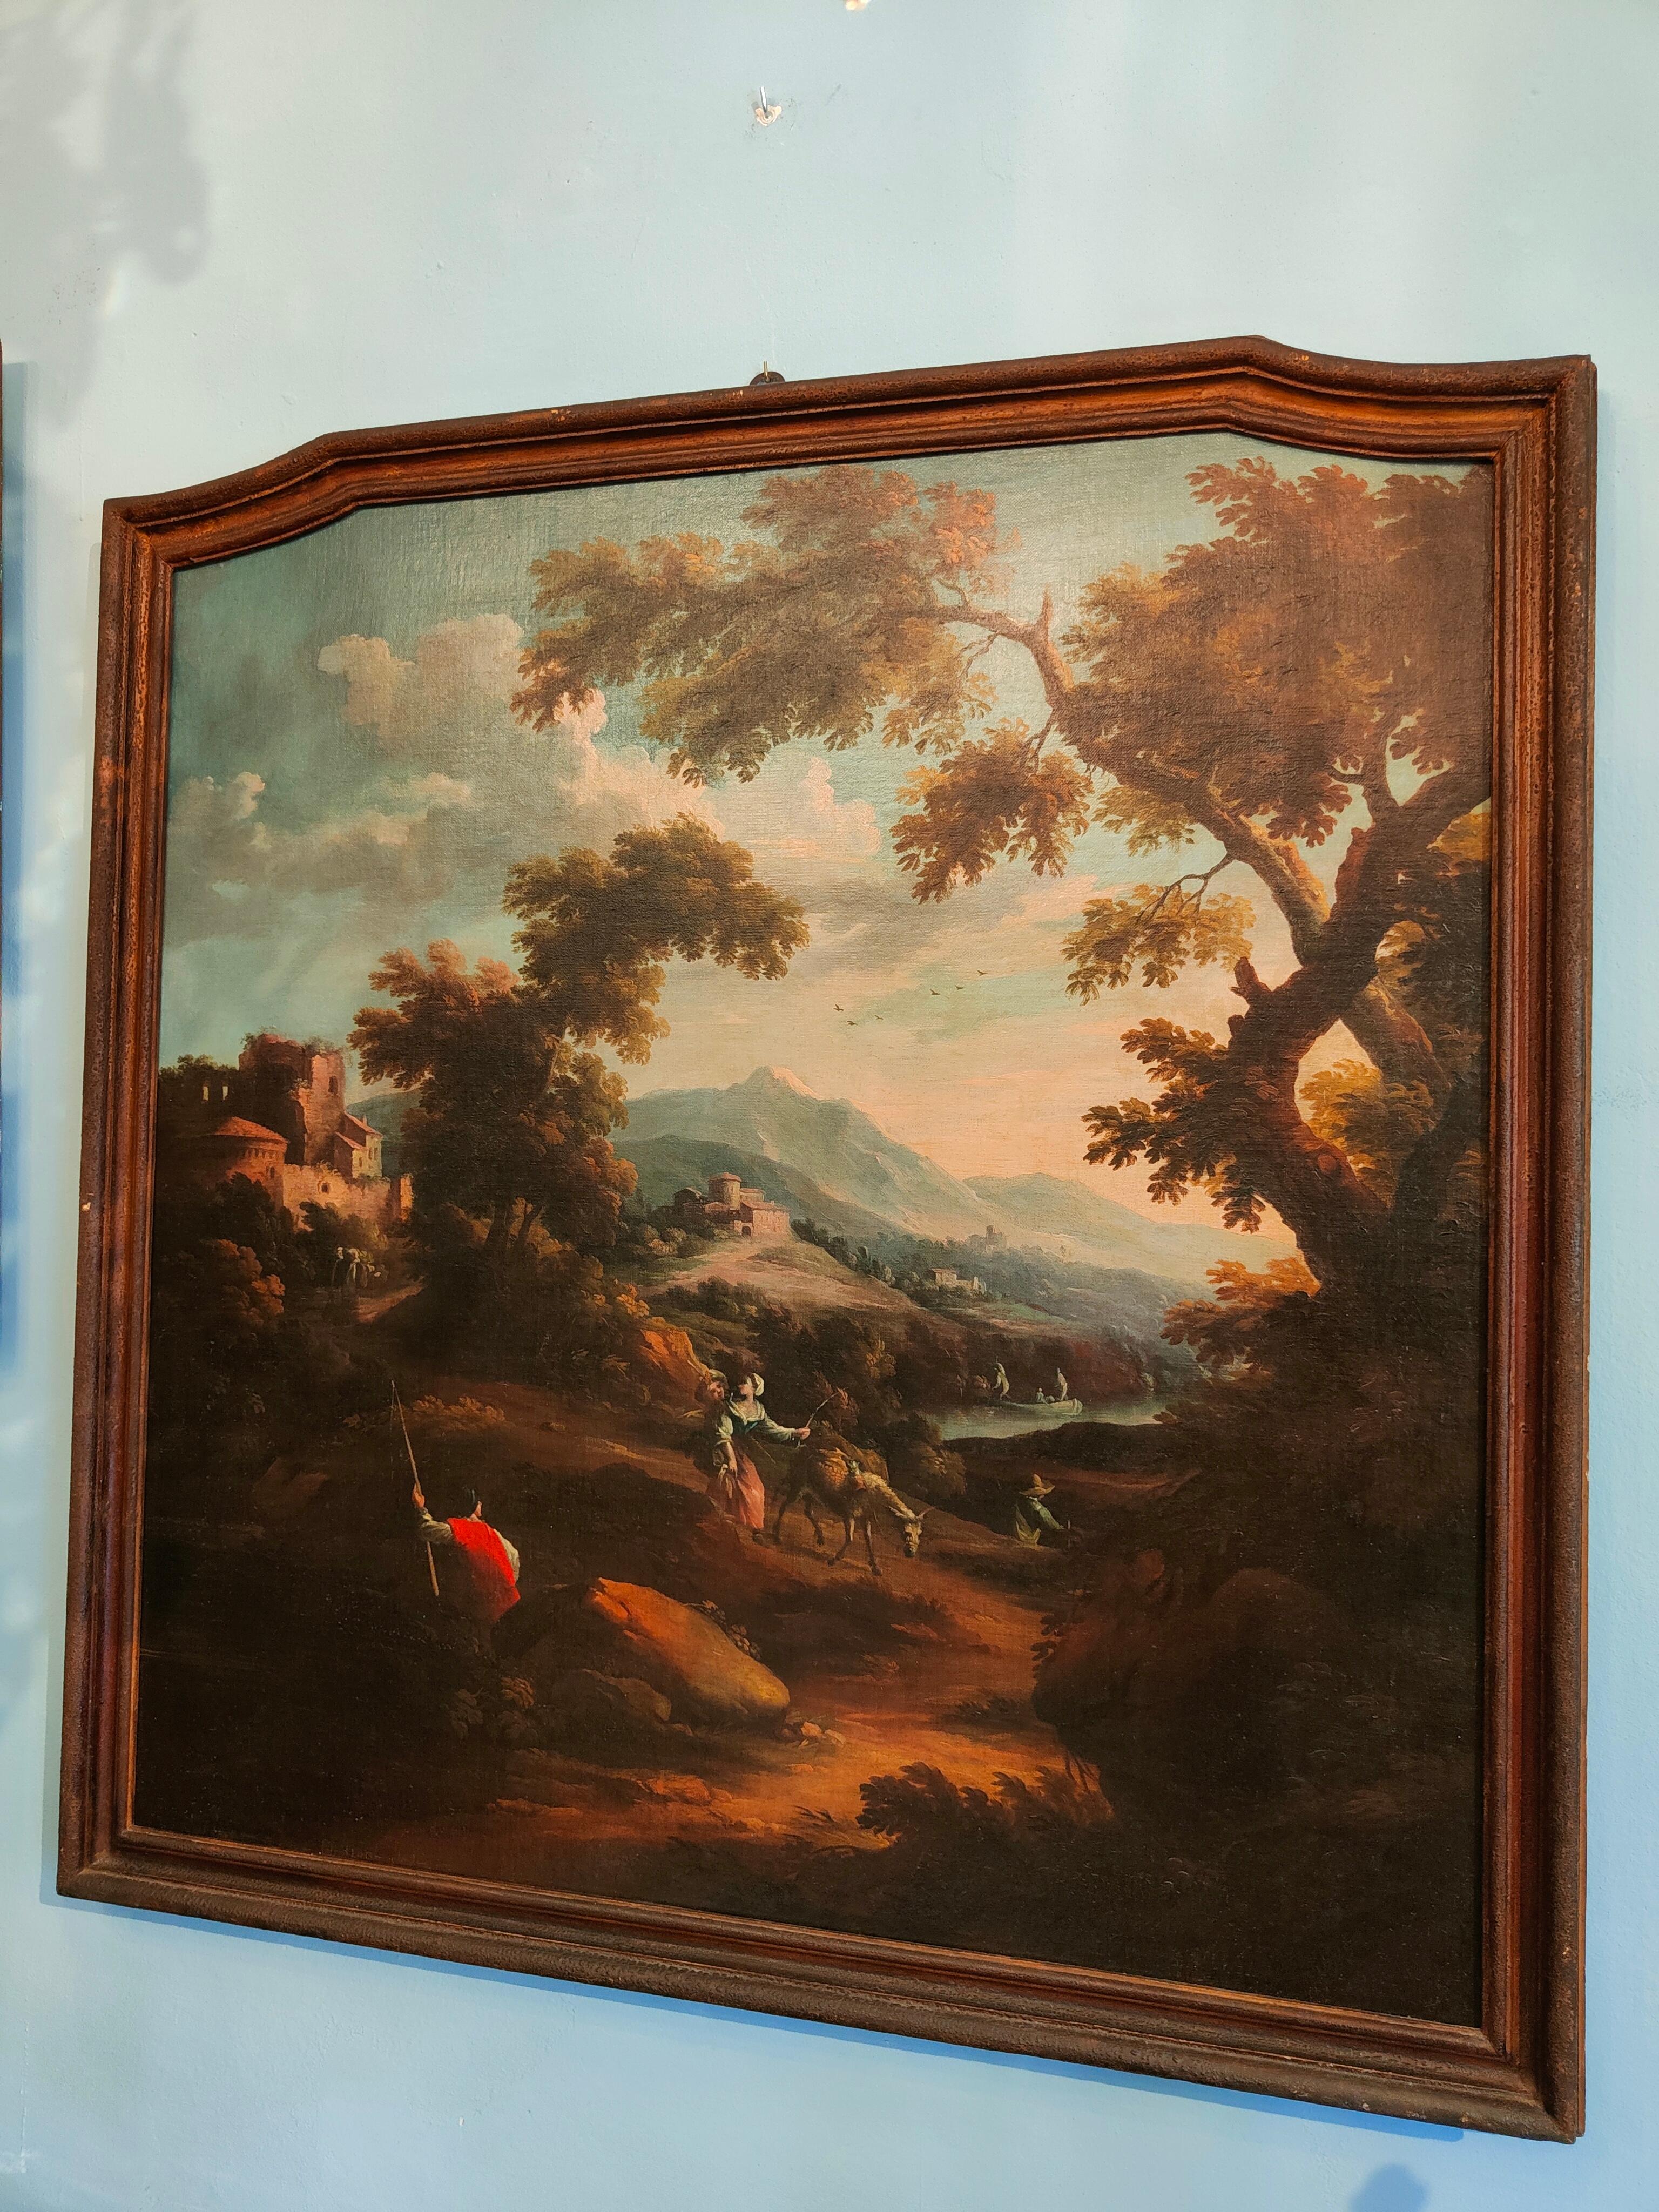 18th century Italian painting by the painter Scipione Cignaroli.
The valuable oil painting on canvas depicts a landscape of the Italian countryside with wayfarers on the banks of the river, with a contemporary frame (18th century).
The painting